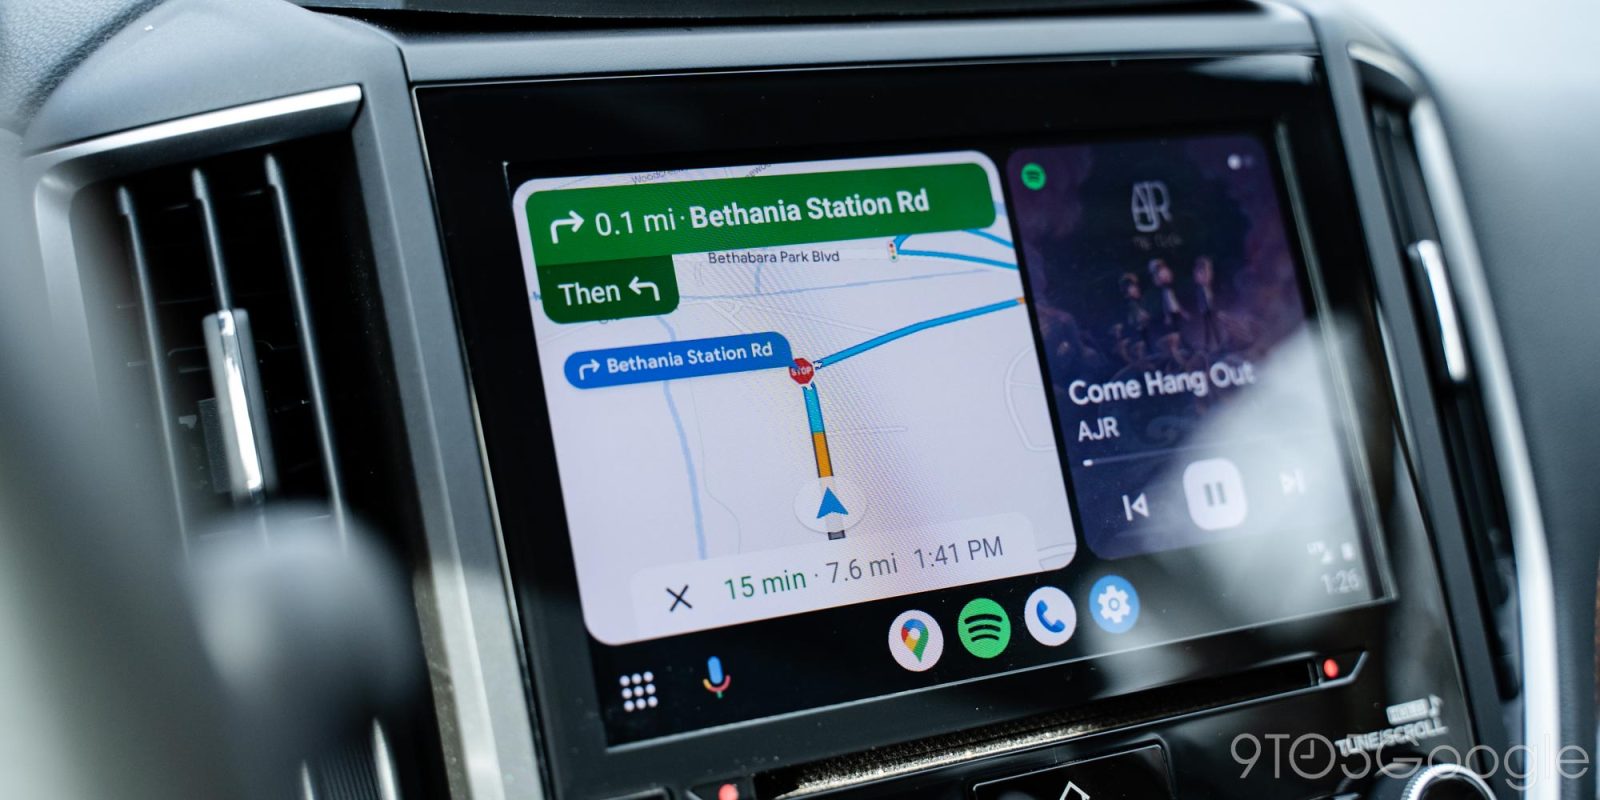 Android Auto gets a new Google Assistant with v10.0 release